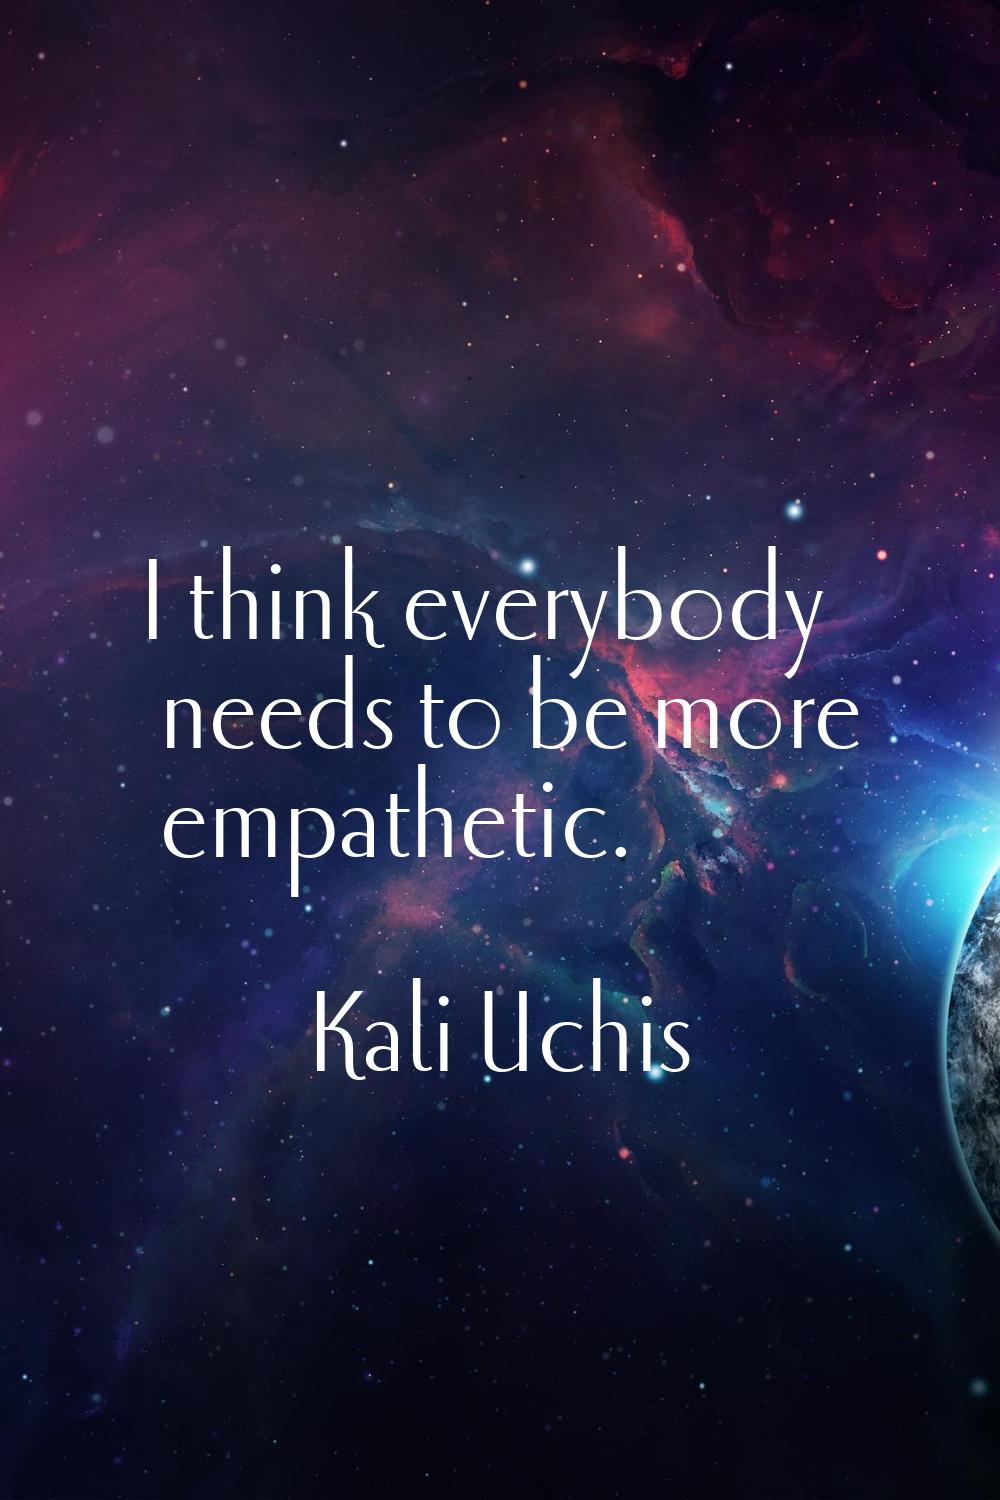 I think everybody needs to be more empathetic.